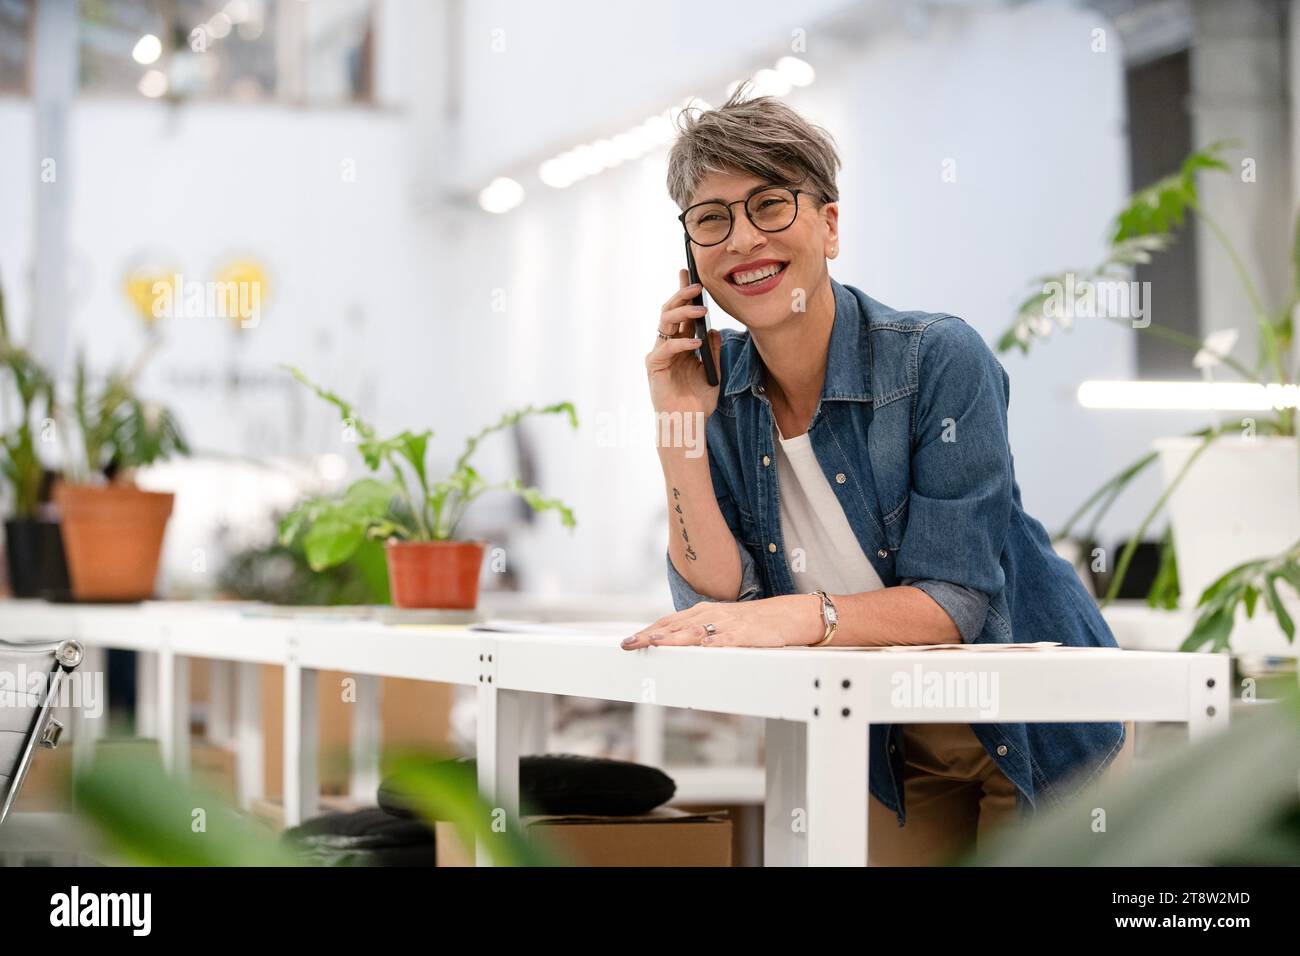 Female designer listening to voice mail while leaning on table Stock Photo